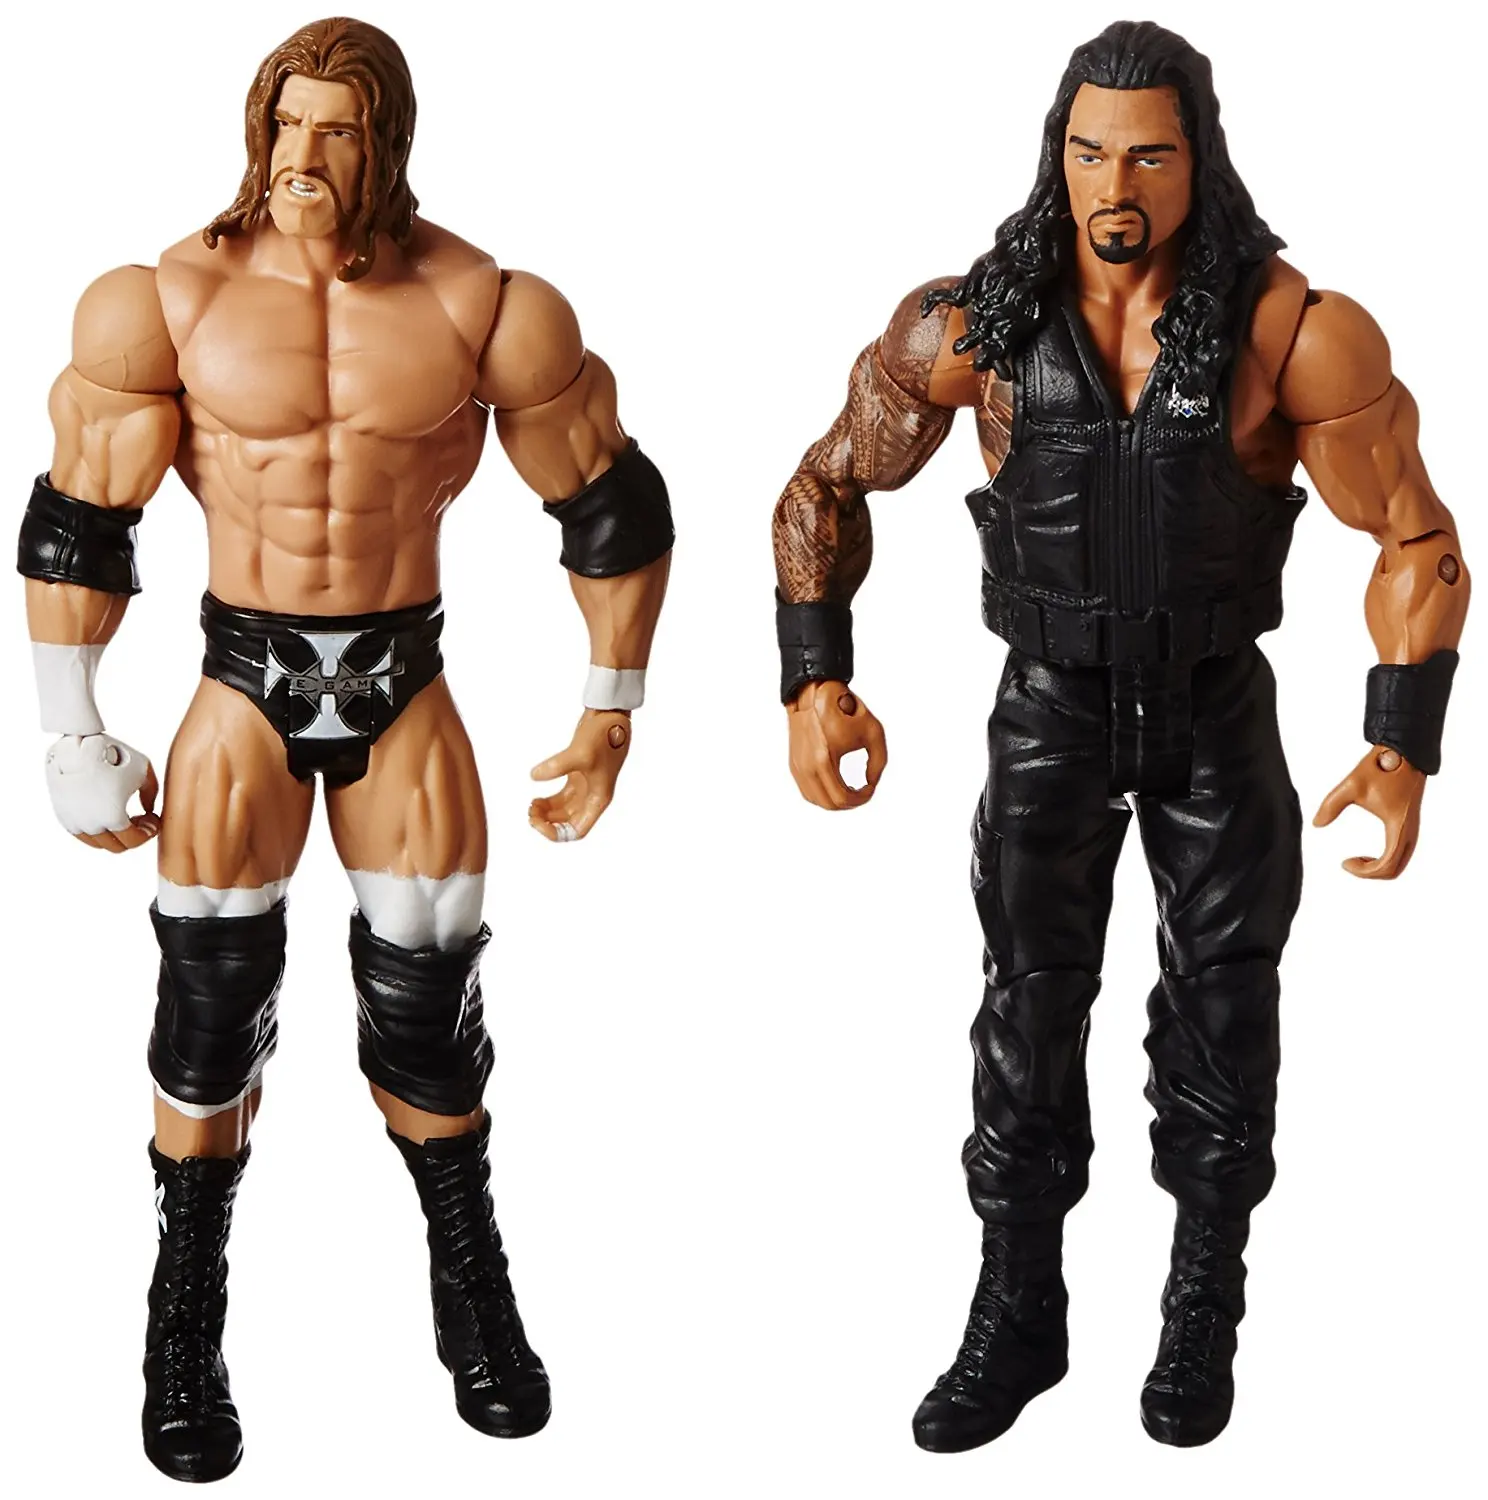 NEW WWE Battle Pack Brock Lesnar vs Roman Reigns Figures 2-Pack FREE SHIPPING